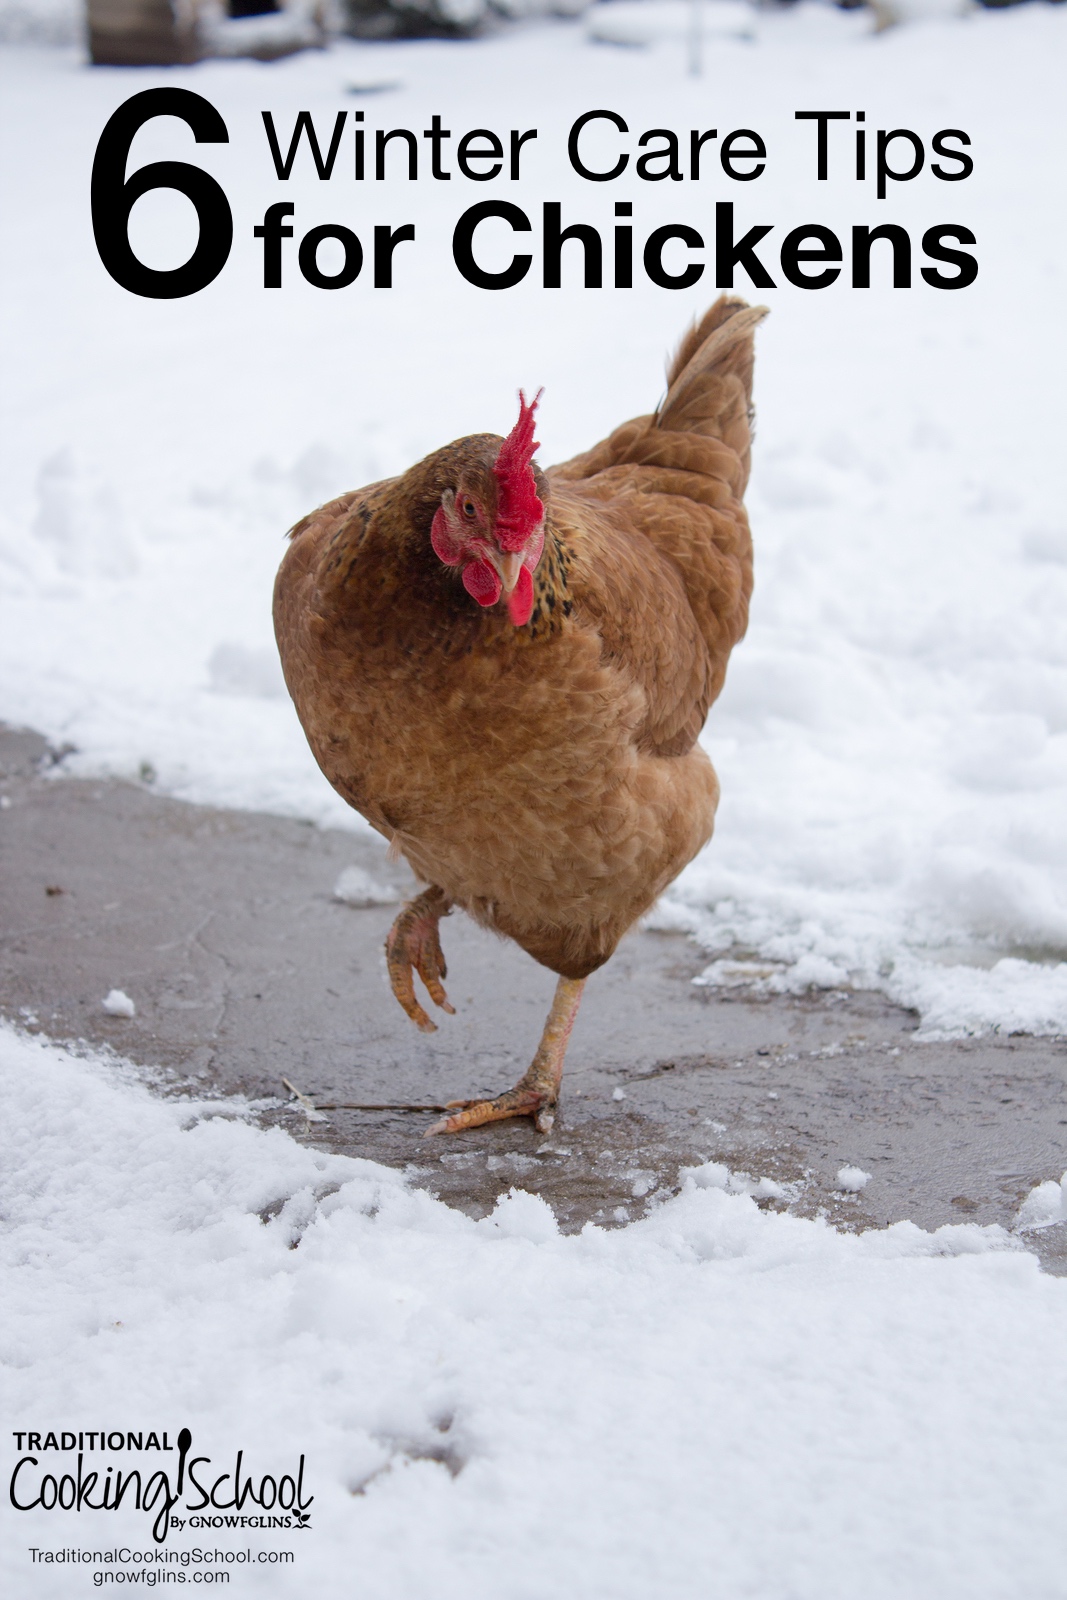 6 Winter Care Tips for Chickens | Chickens are some of the easiest homestead animals to keep... Yet, they may need some extra attention during extreme cold weather conditions. A bit of extra forethought and care will help your birds (and you!) be more prepared as winter settles in. | TraditionalCookingSchool.com